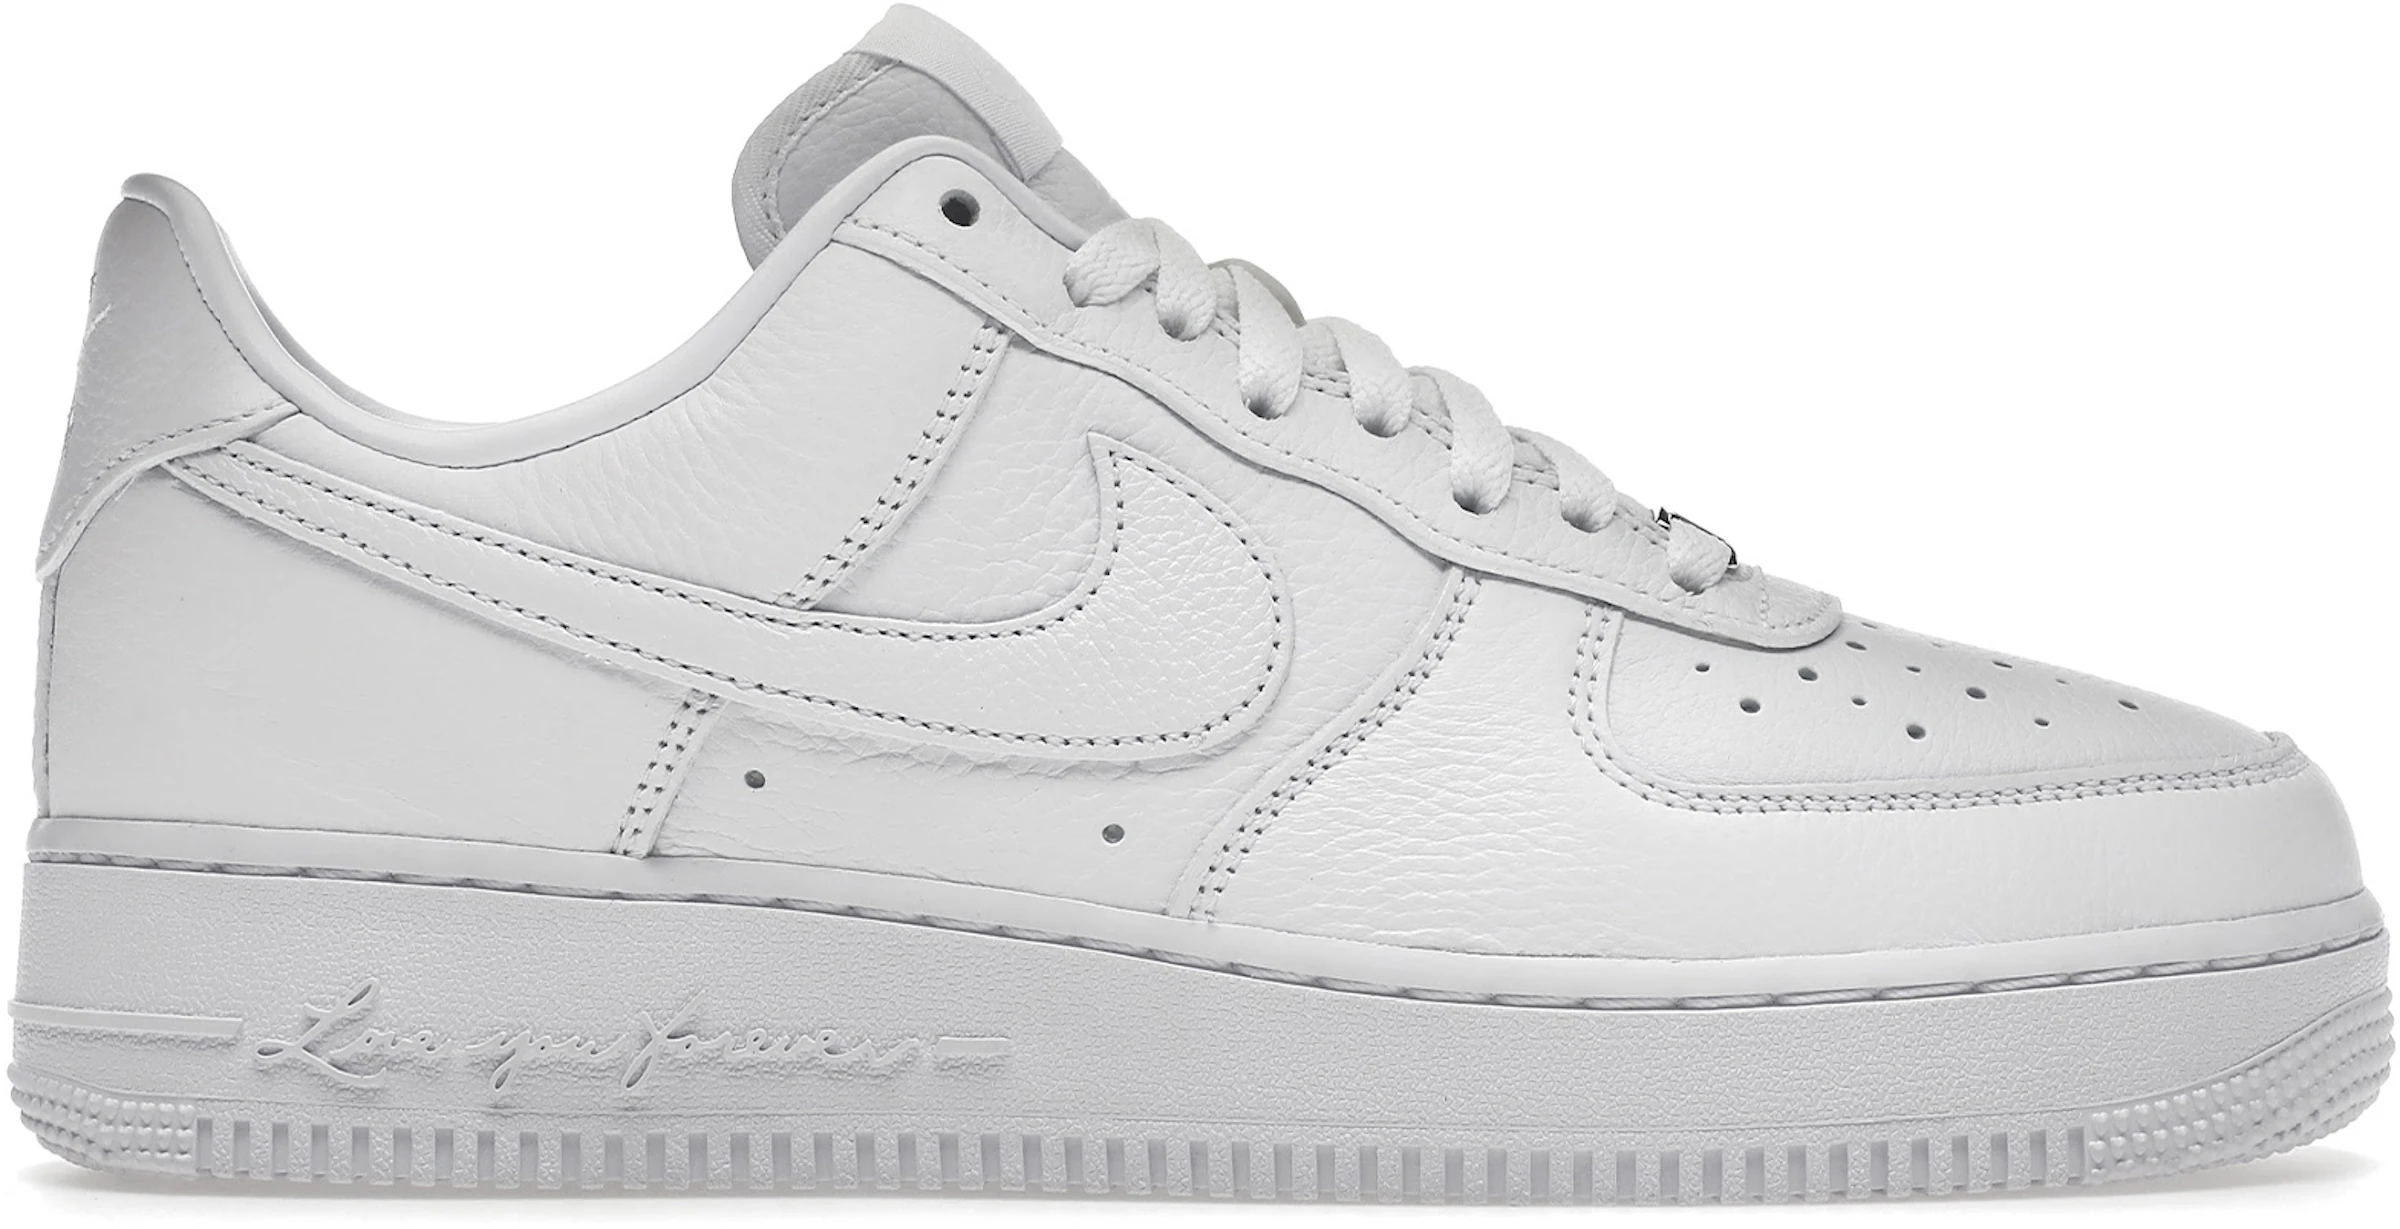 Nike Air Force Low Drake NOCTA Certified Lover Boy | sites.unimi.it